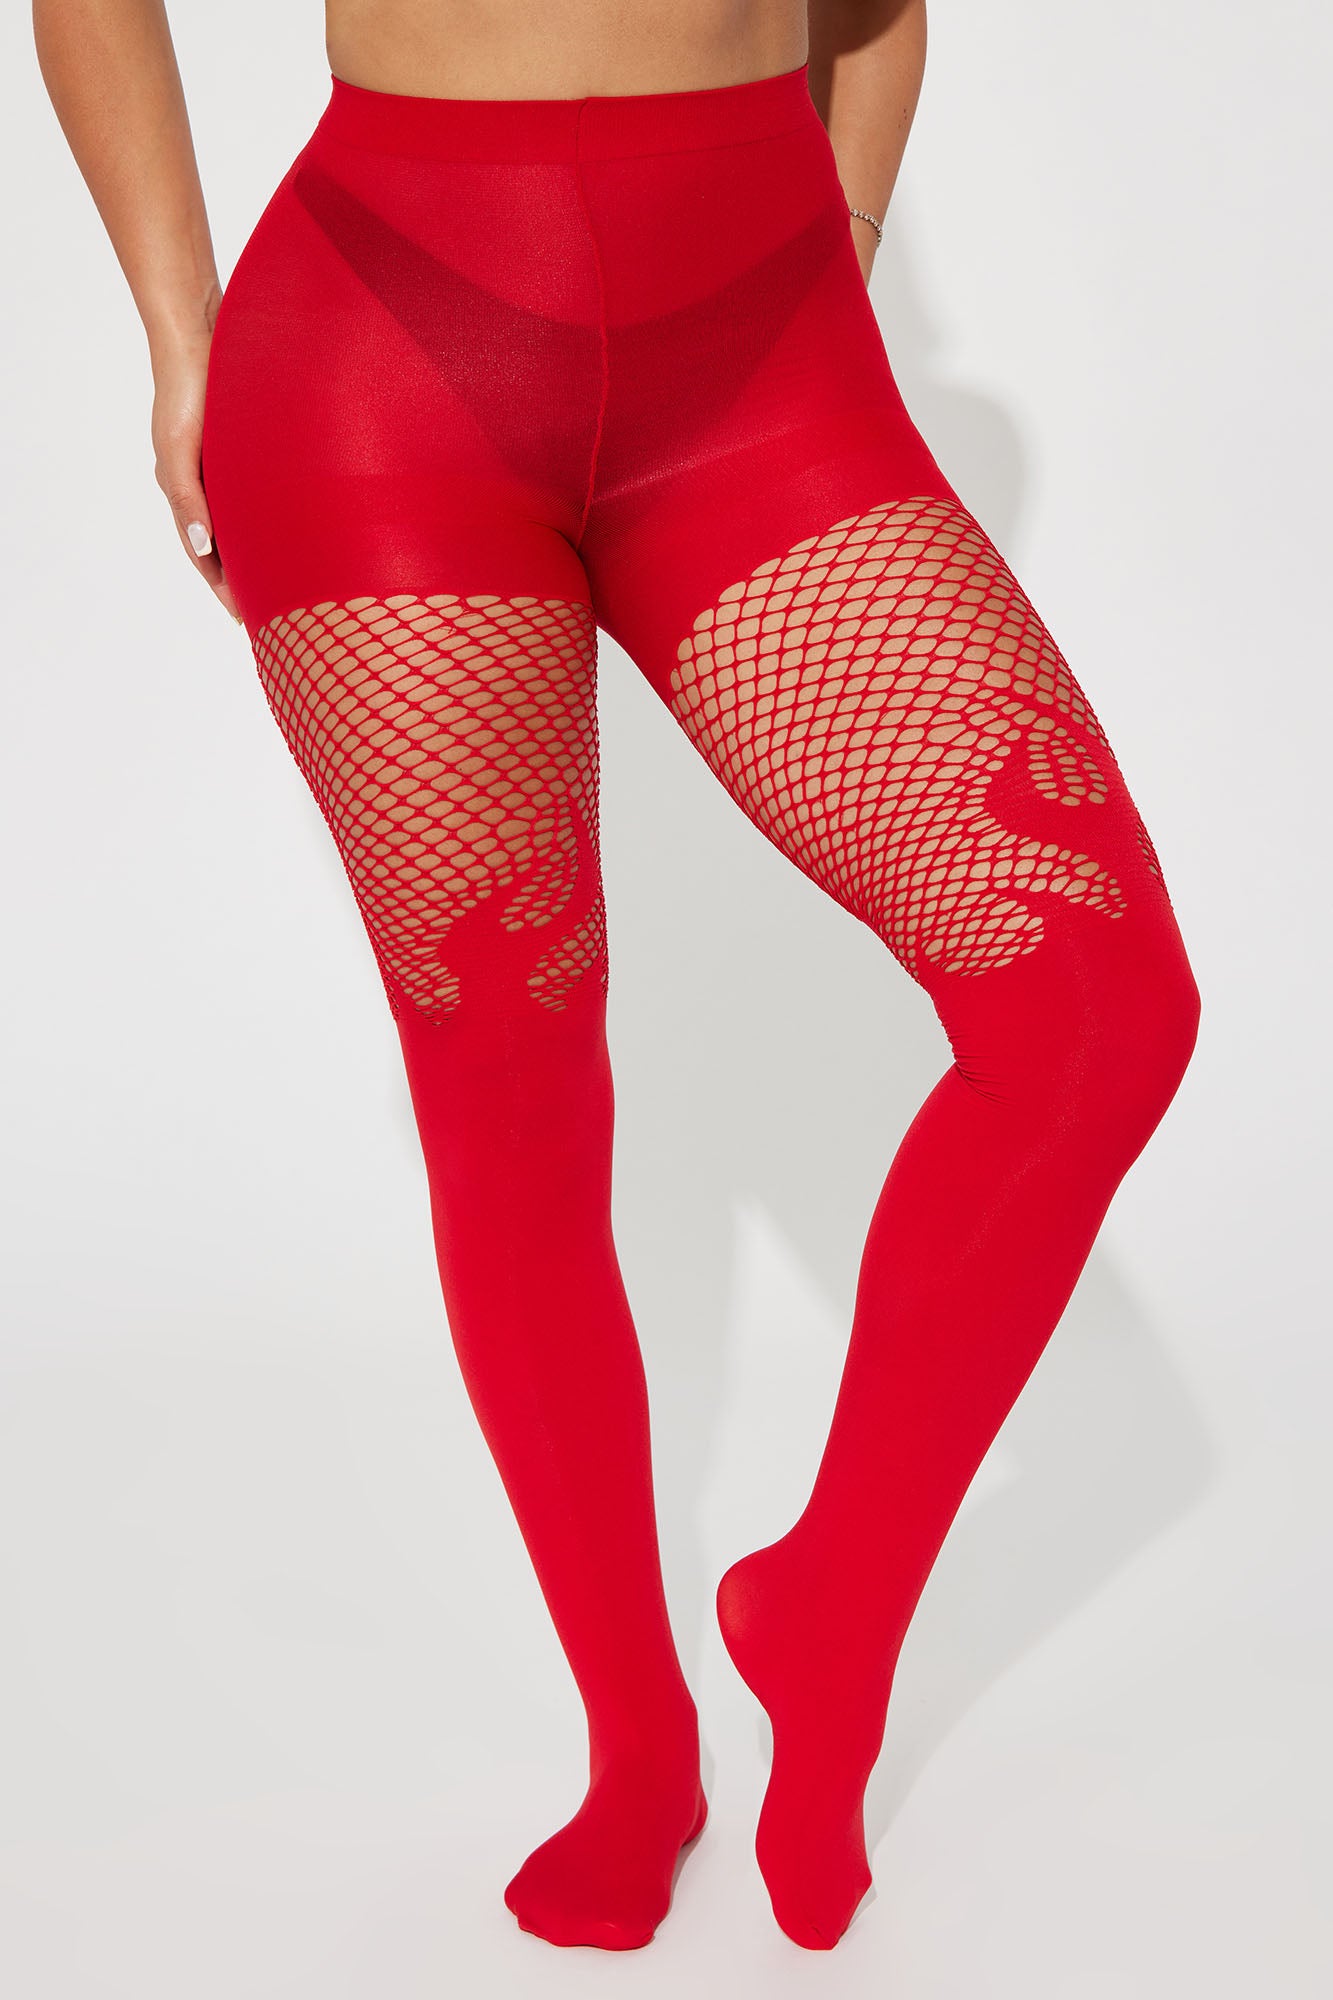 Hotter Than You Tights - Red